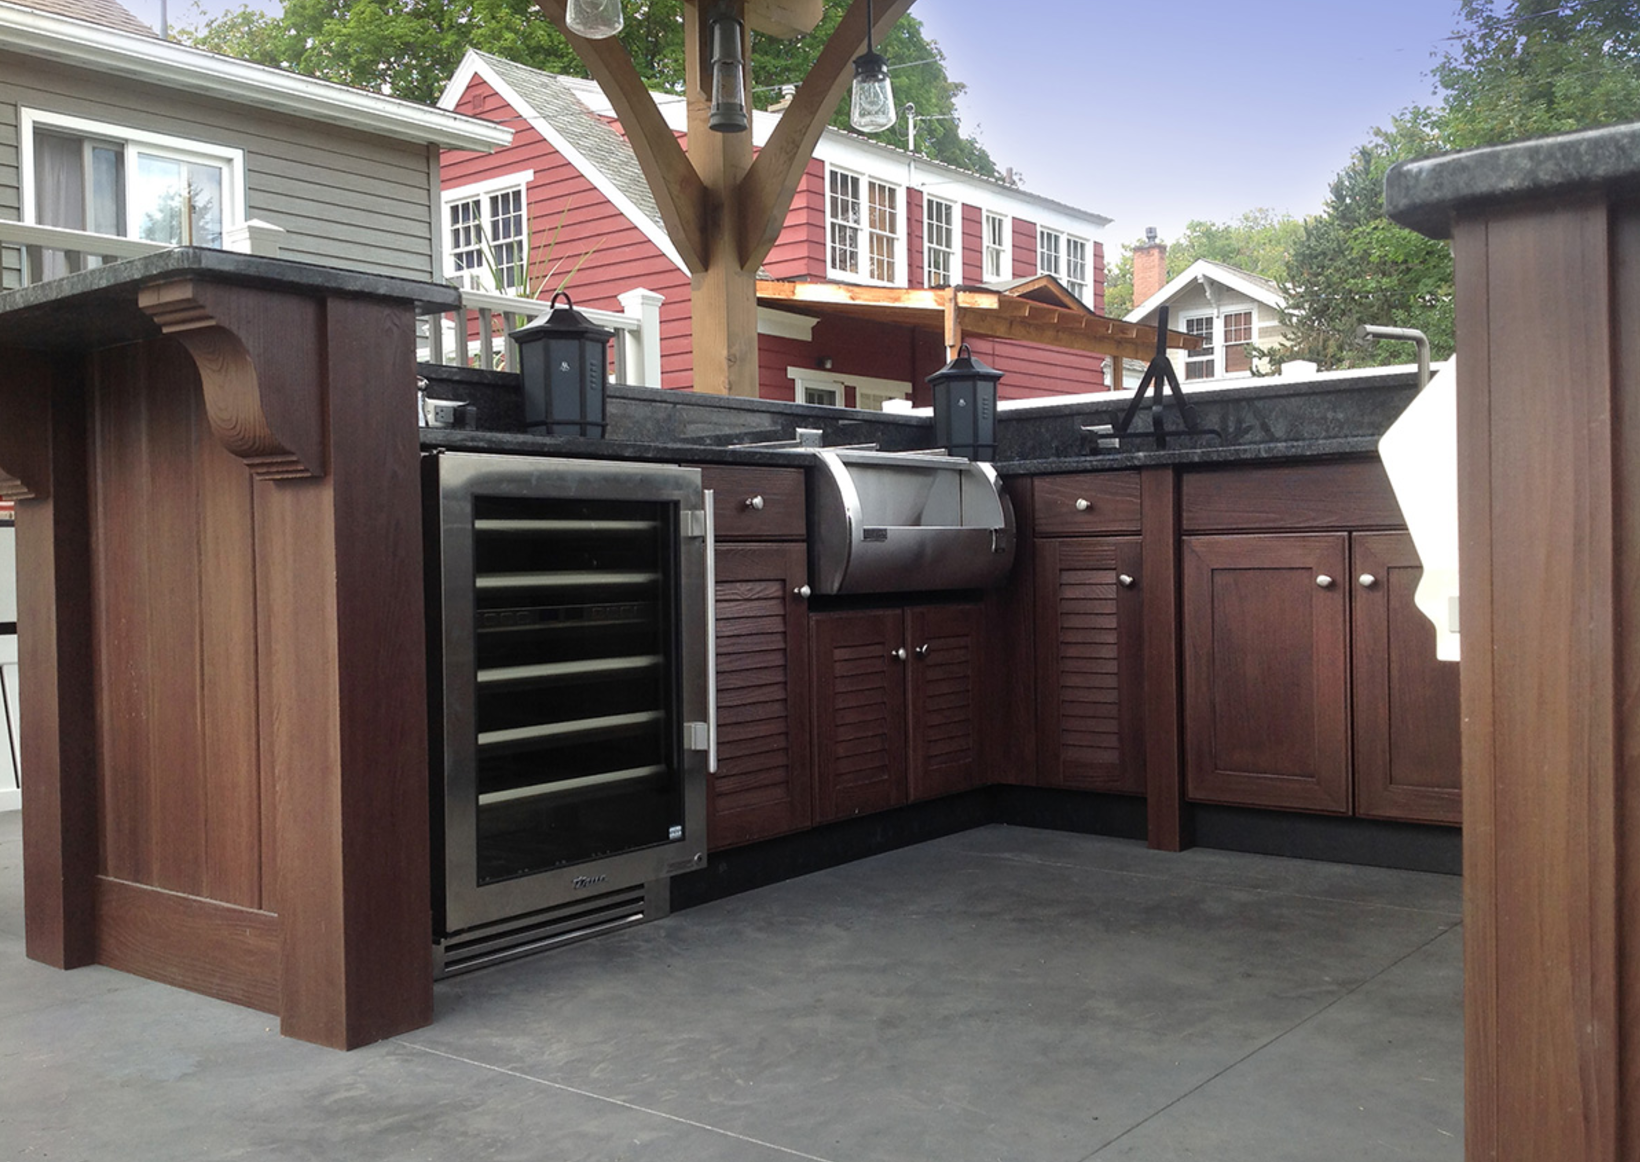 Weatherproof Outdoor Cabinets What, How To Weatherproof Outdoor Cabinets